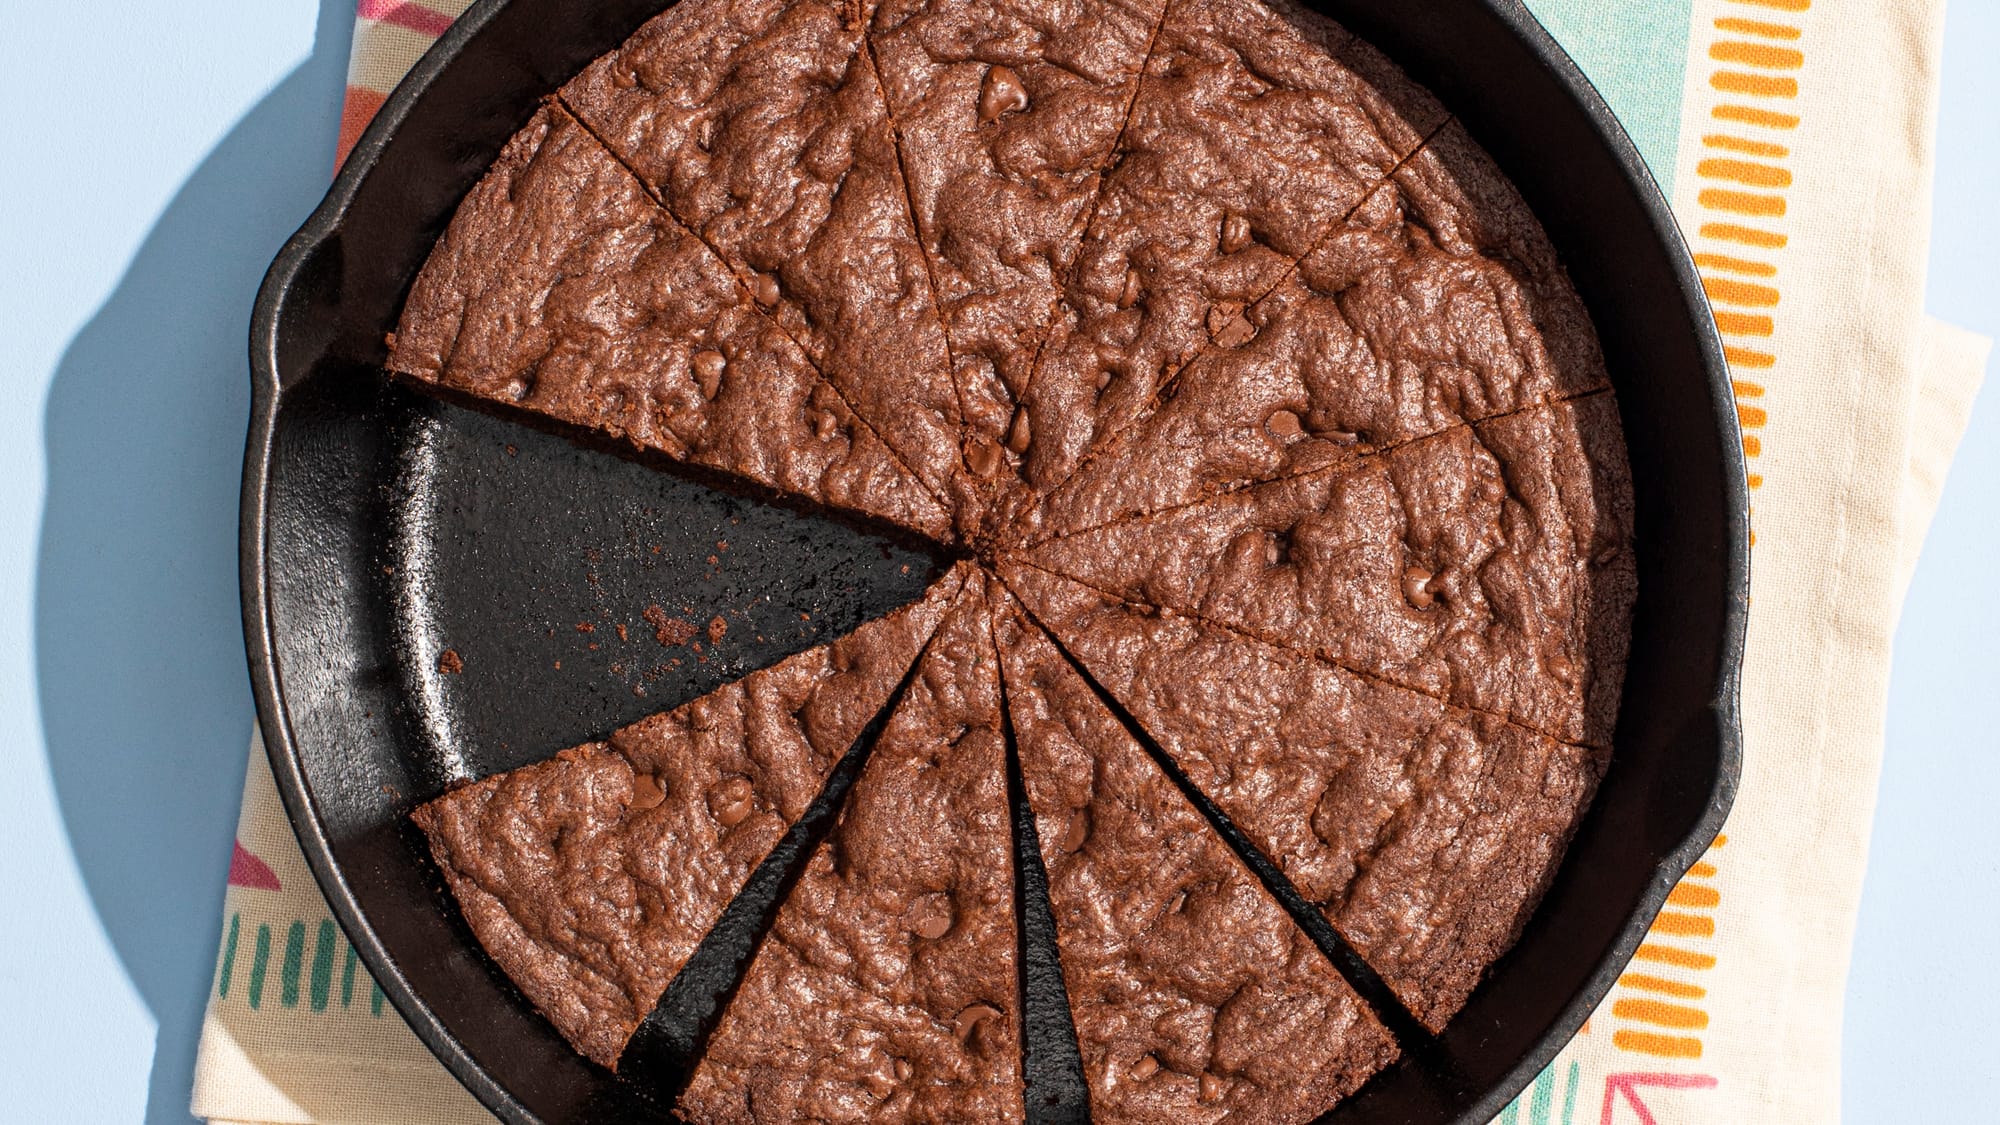 Craving a sweet treat? Use your cast-iron skillet to make a luscious dessert